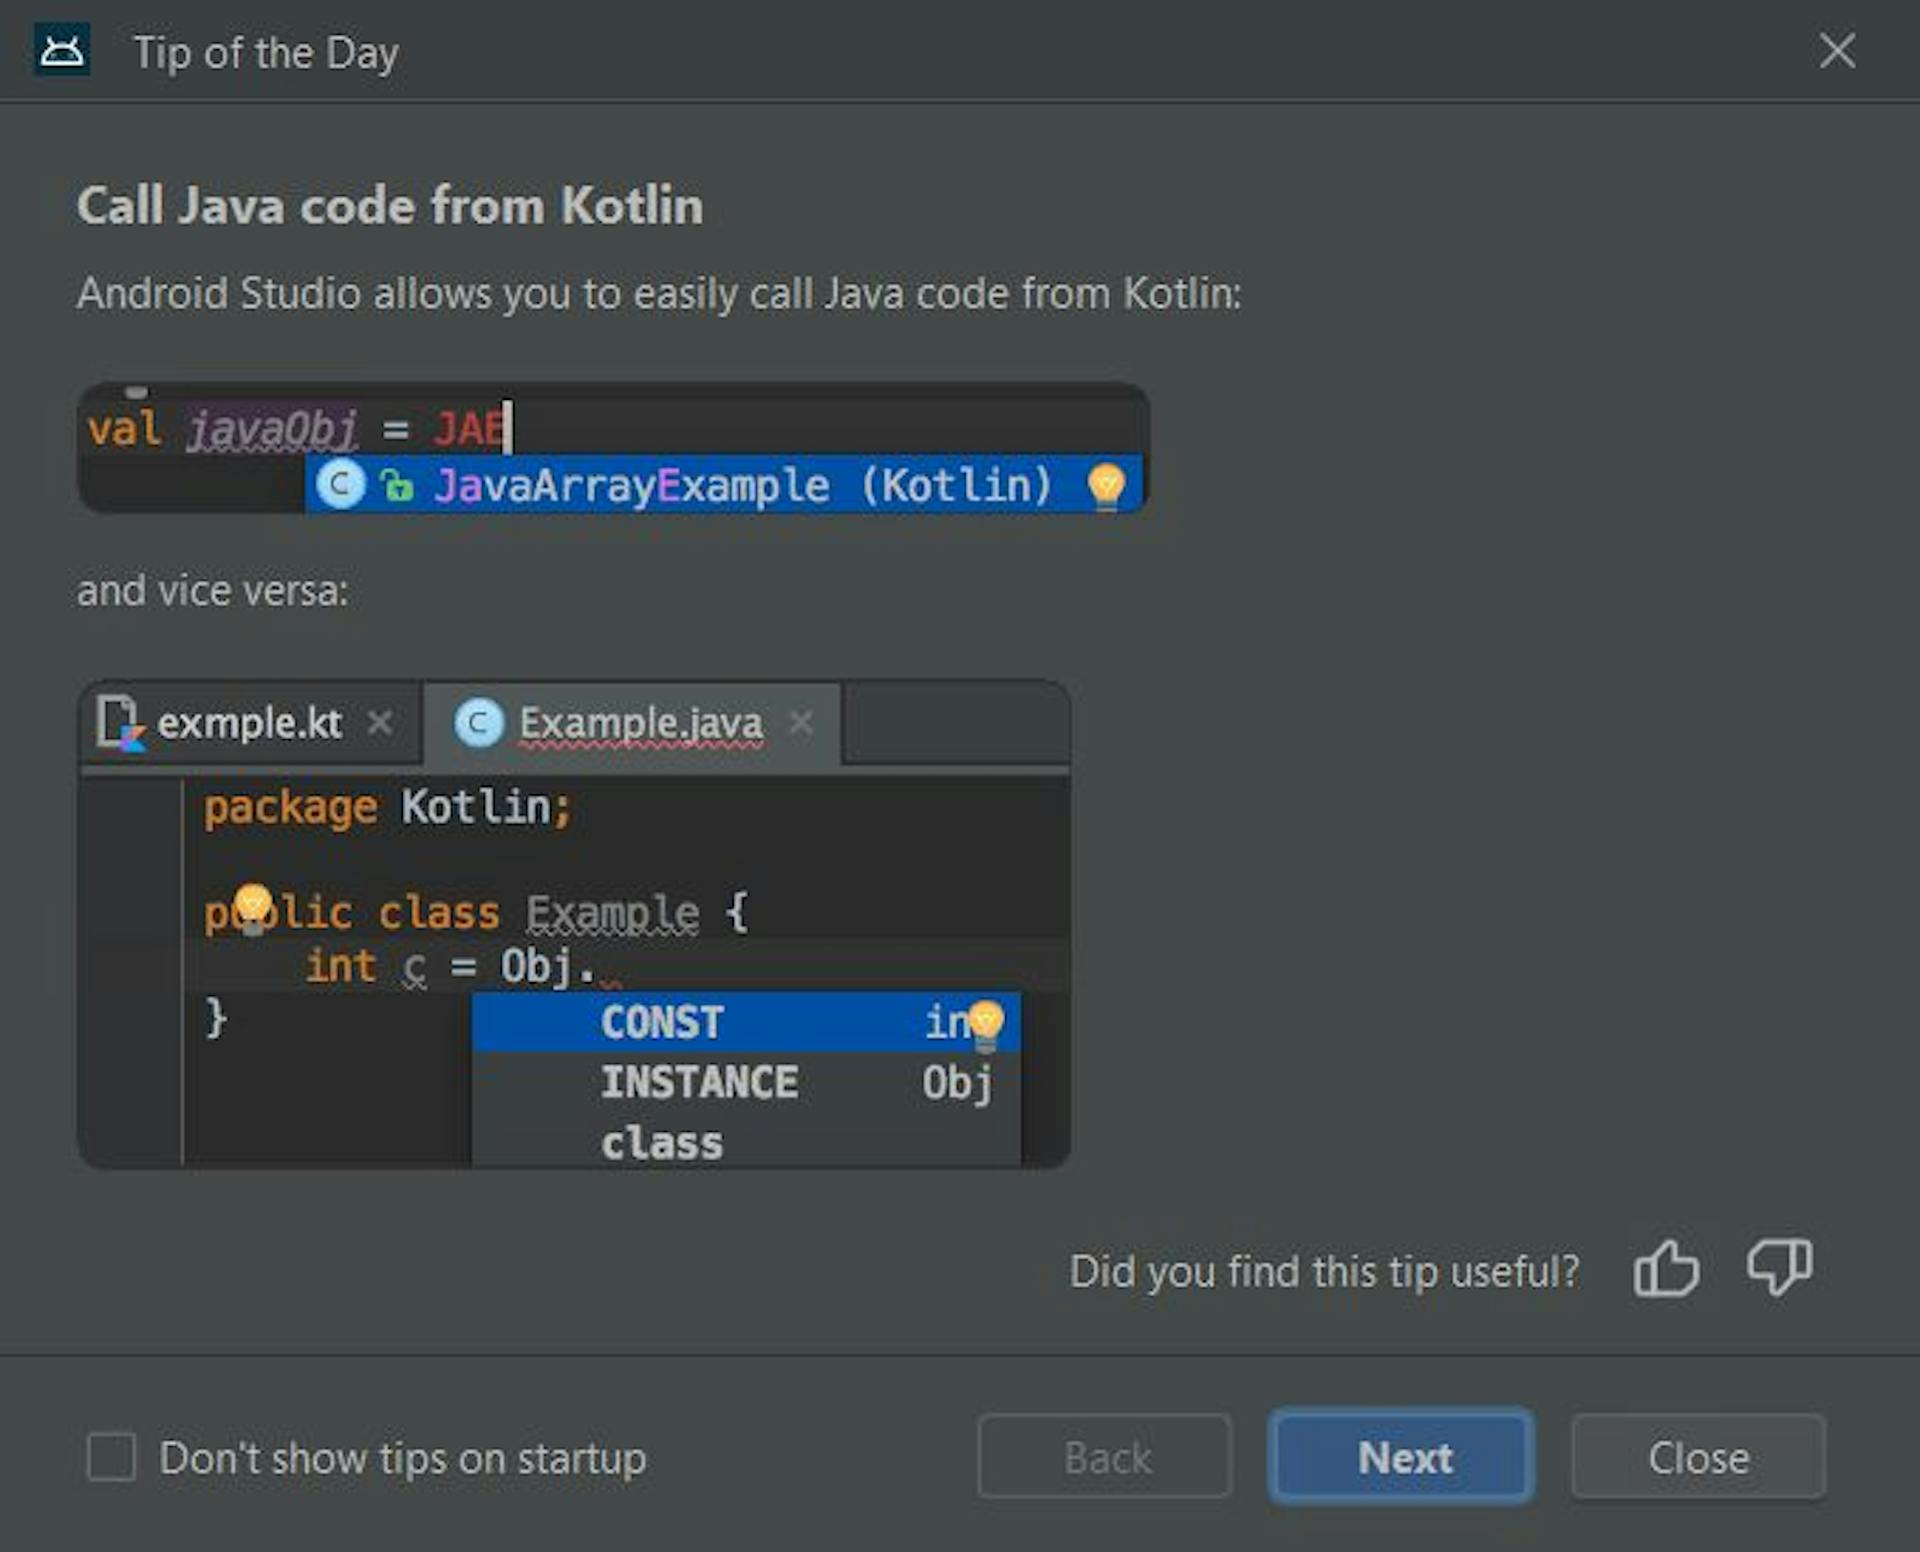 Android Studio's tip of the day